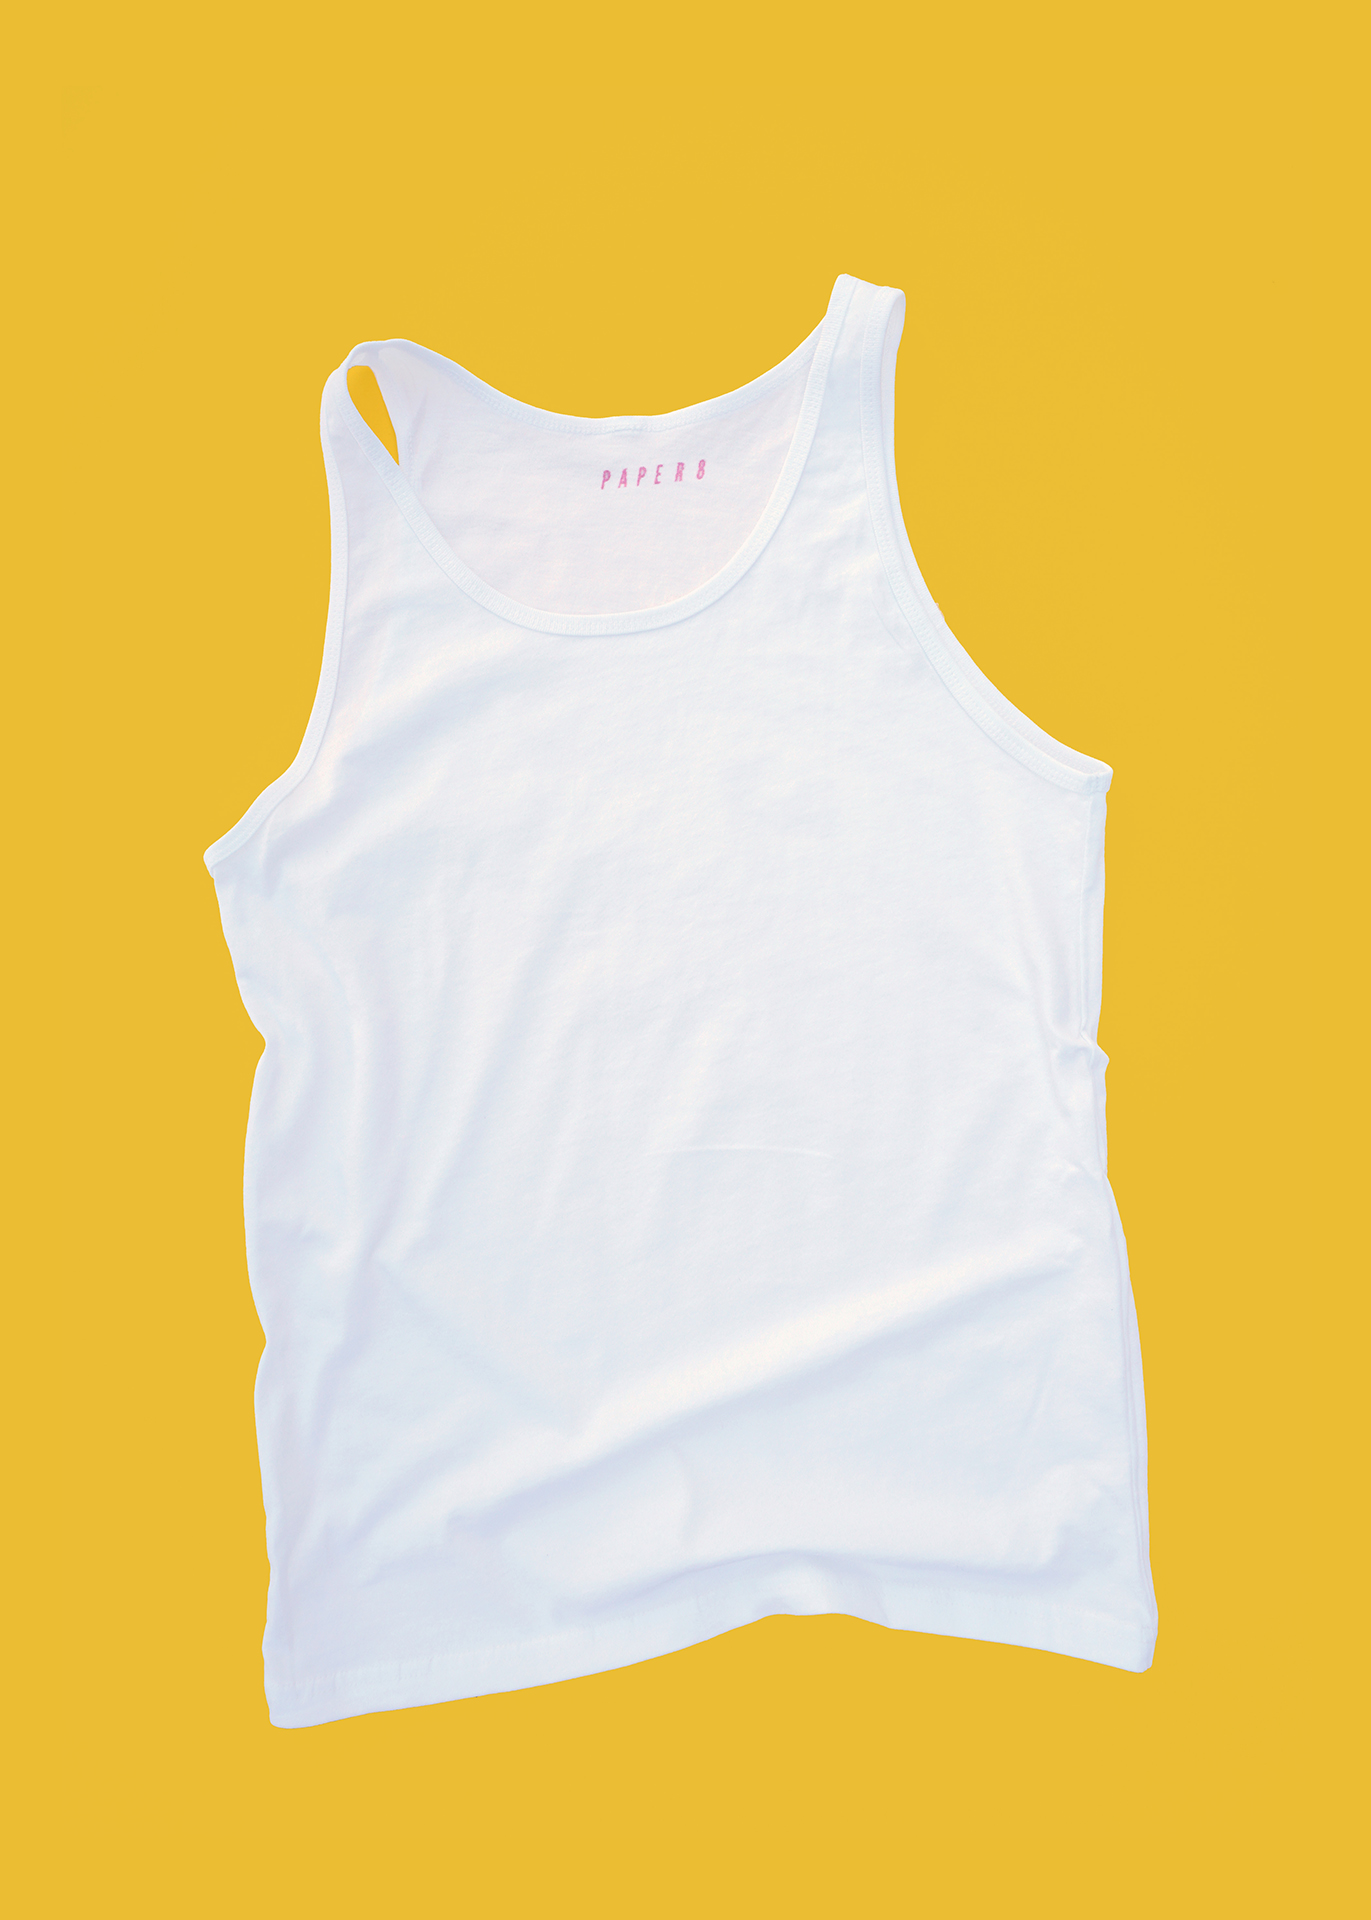 Print your own tank top | Los Angeles | PAPER 8 APPAREL